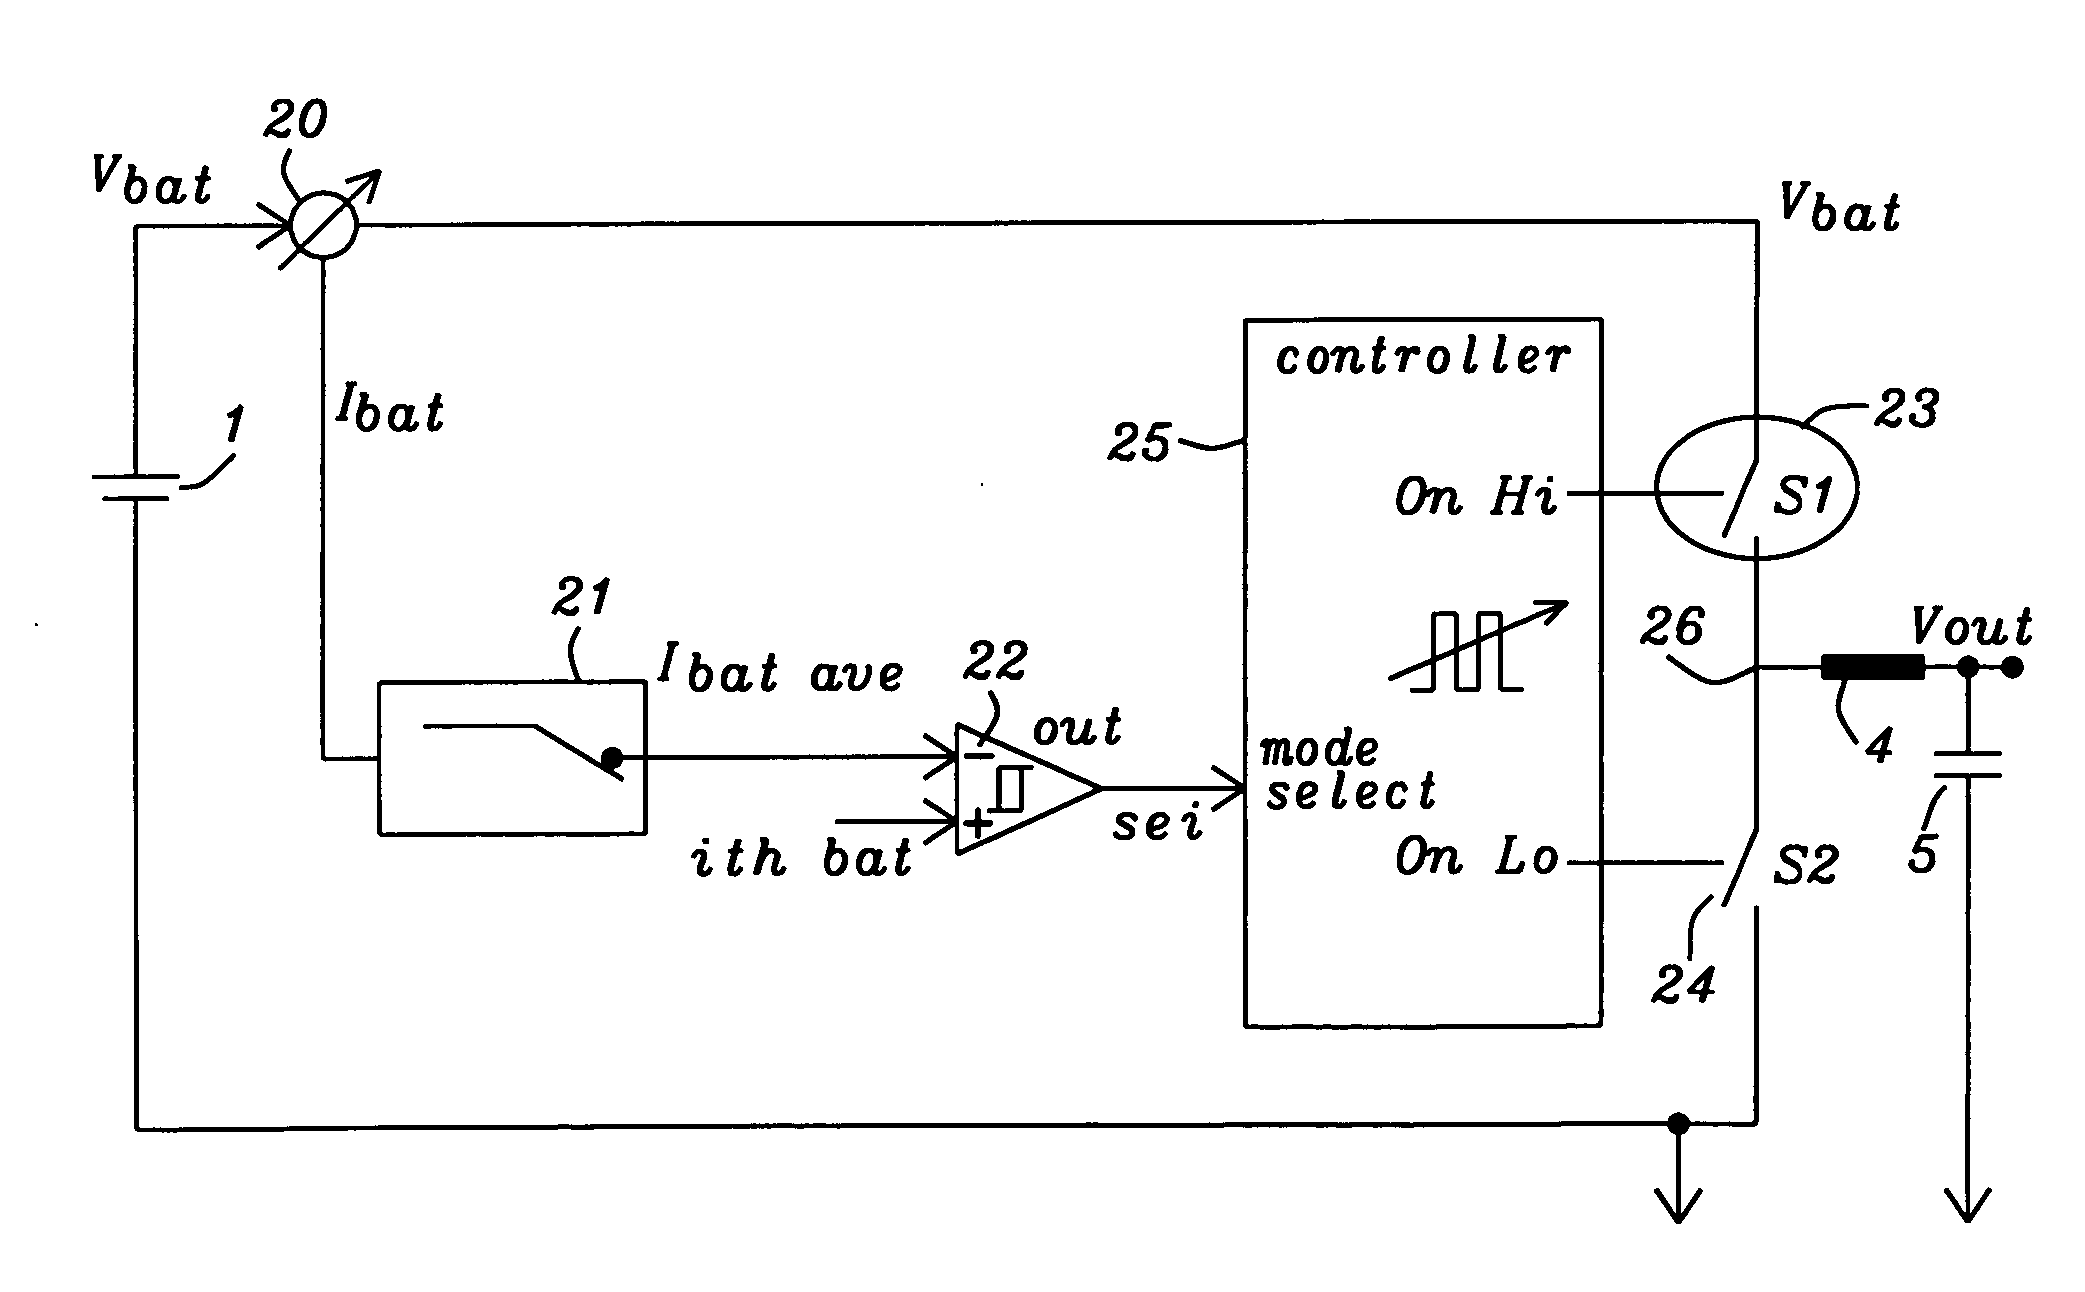 Buck converter threshold detection for automatic pulse skipping mode